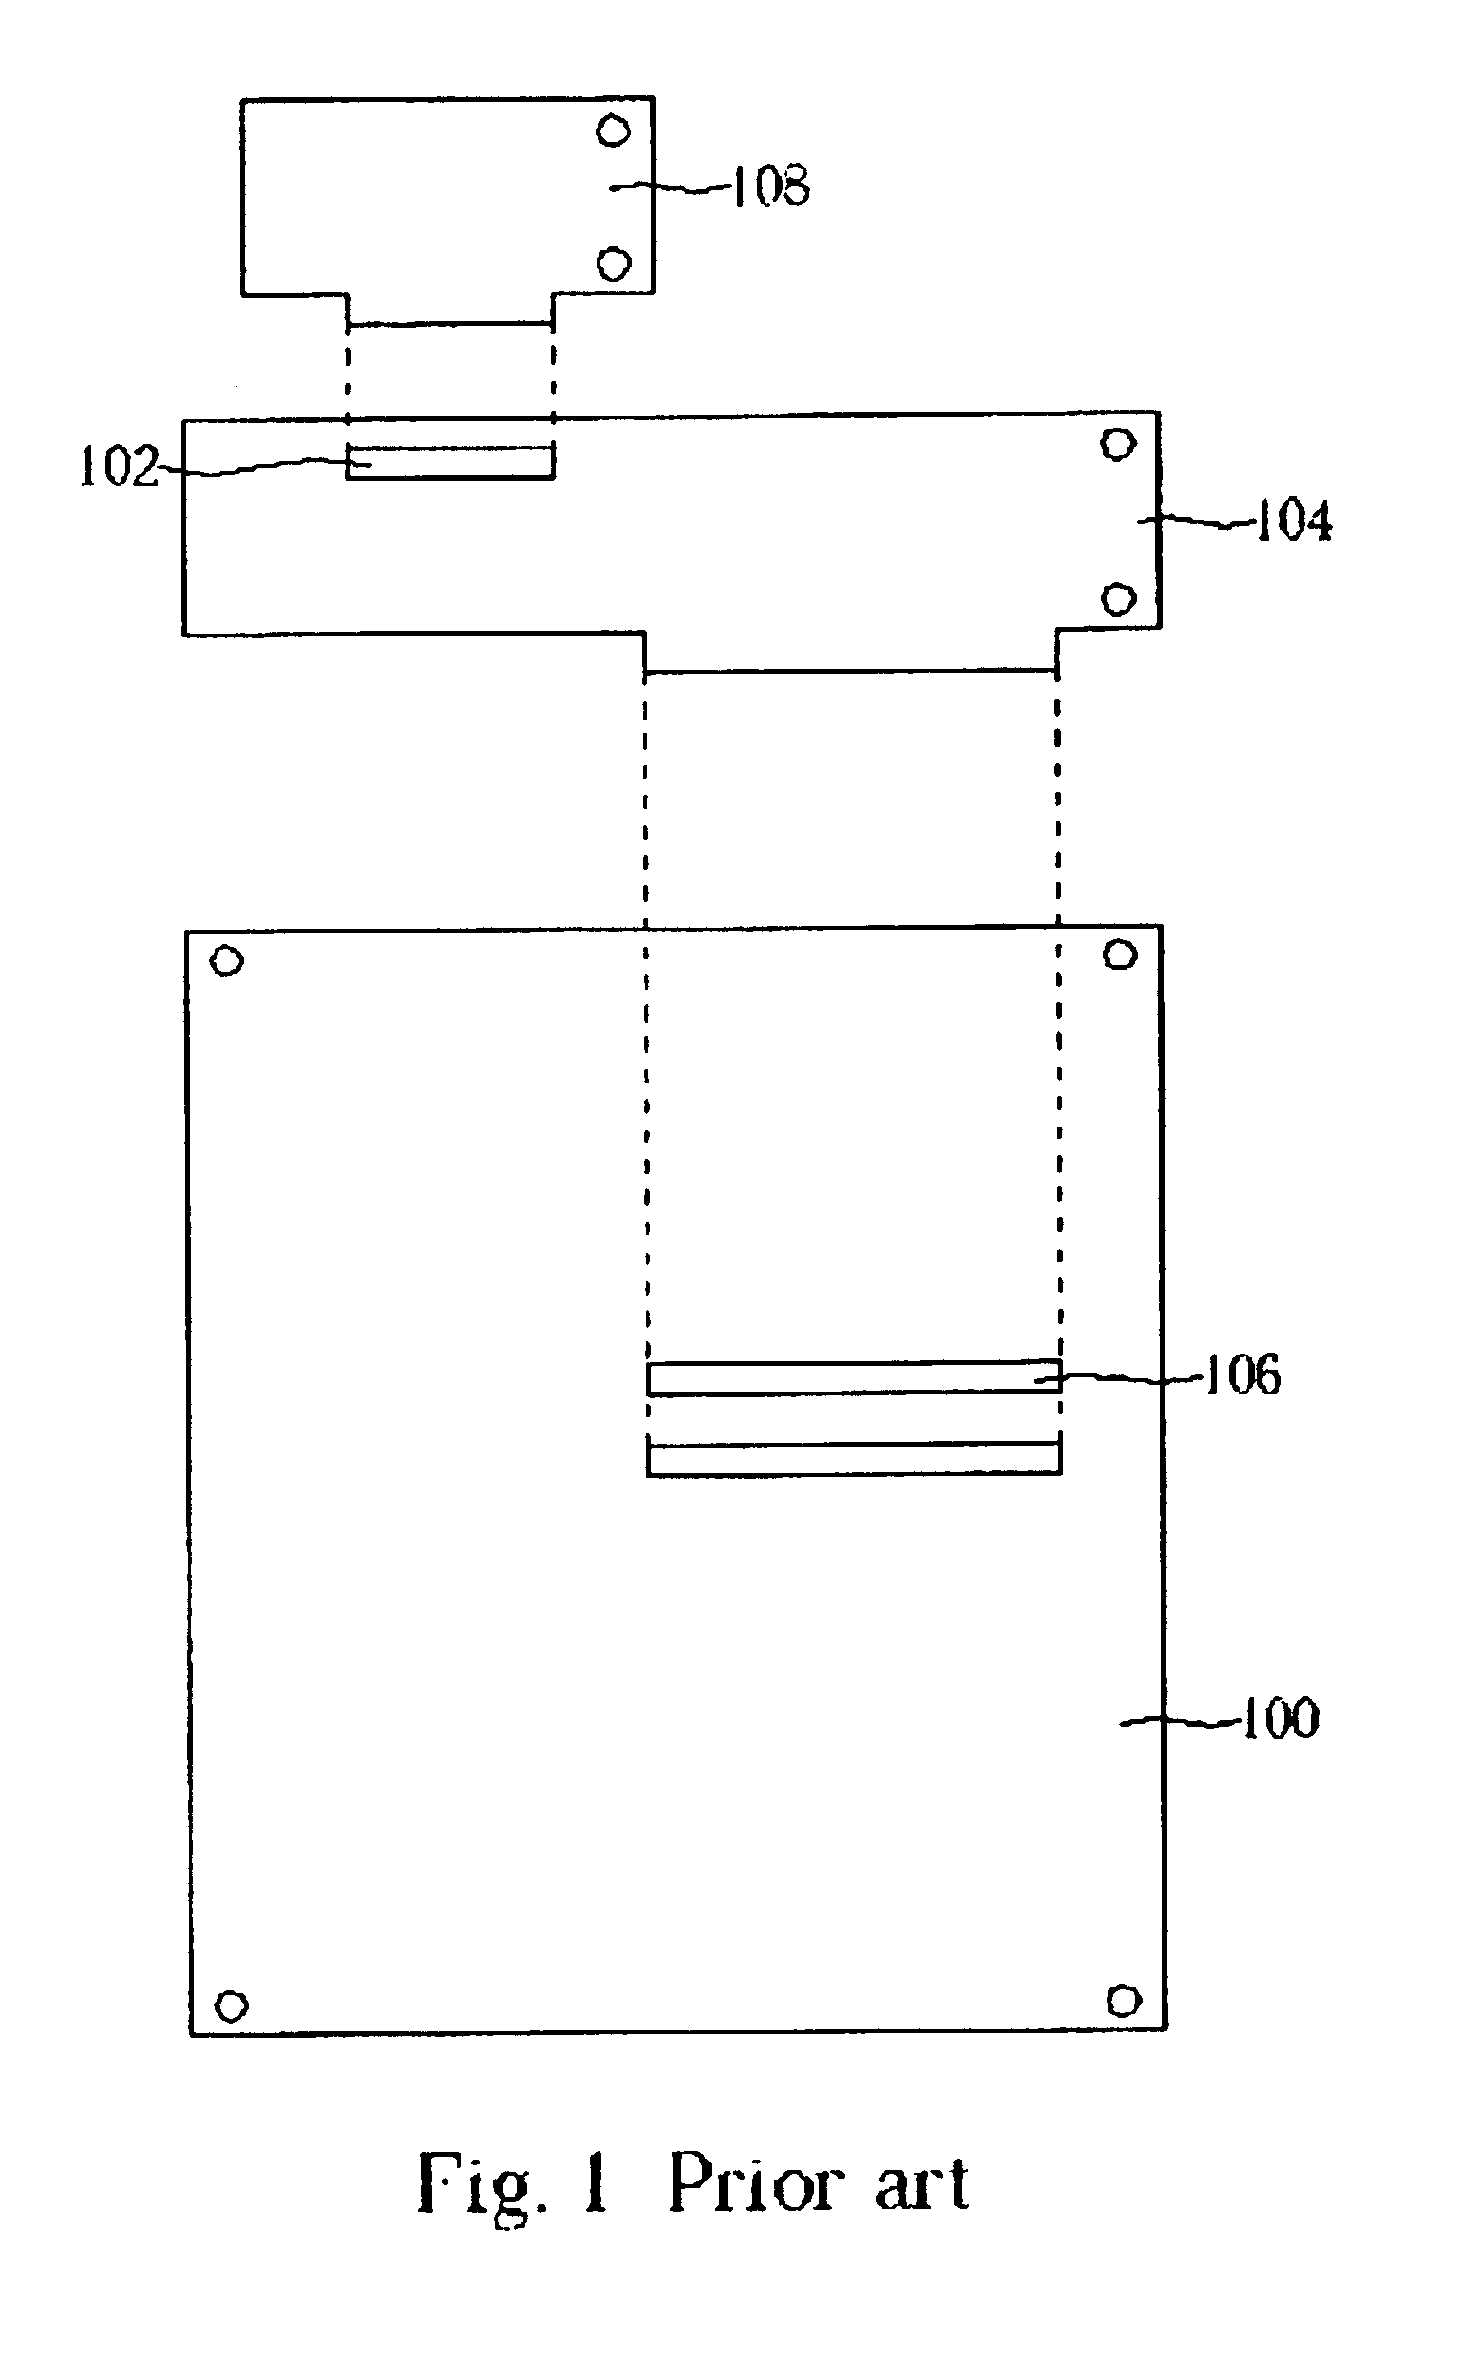 Computer backplane with an accelerated graphics port